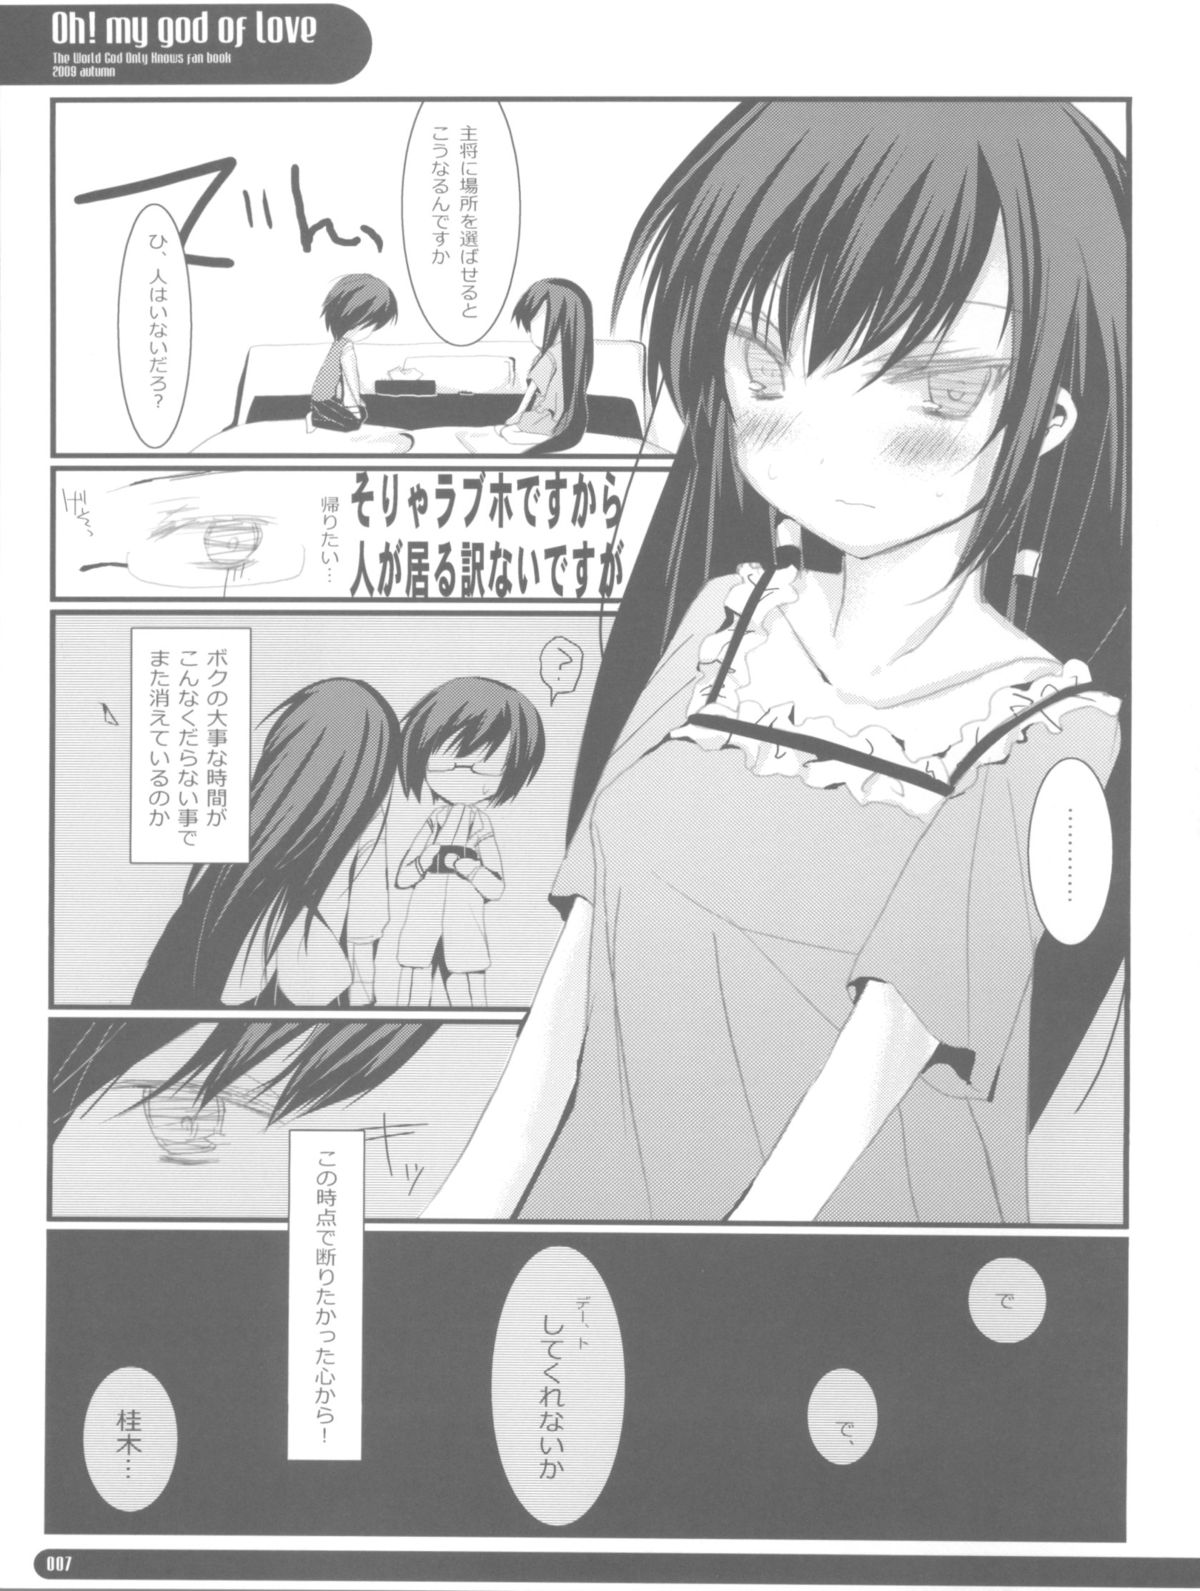 [Hacca Candy (Ise.)] OH!MY GOD OF LOVE (The World God Only Knows) page 7 full